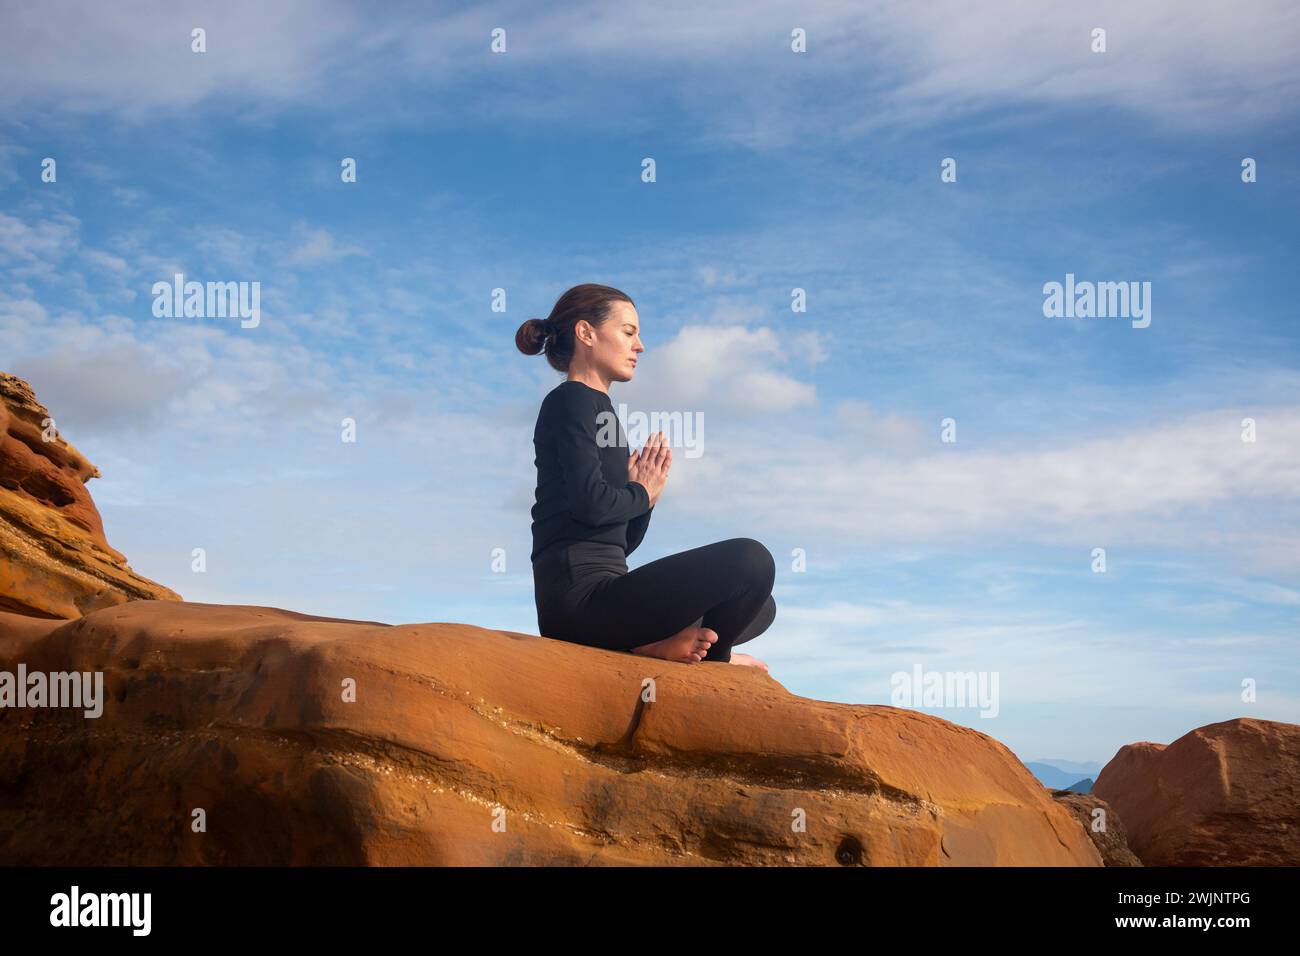 Woman meditating and practicing yoga on top of red rocks Stock Photo